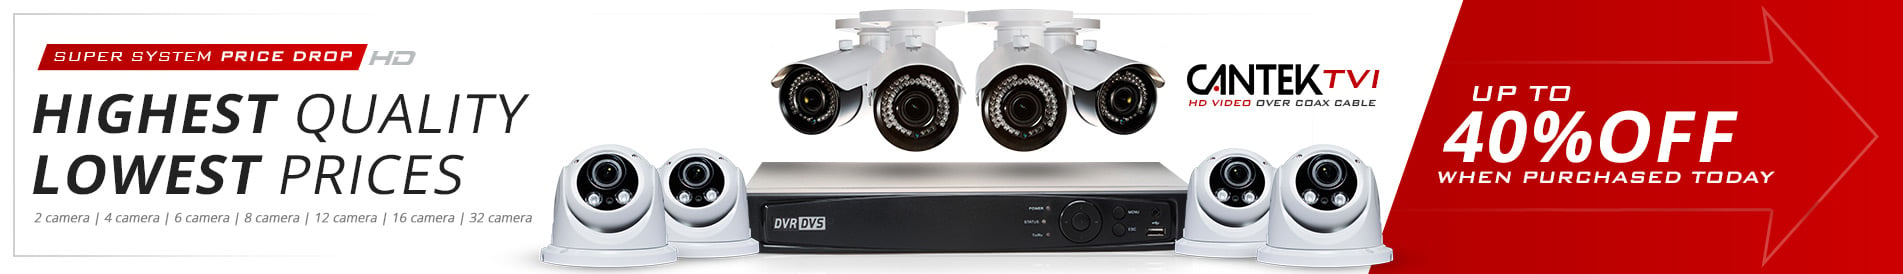 Cantek Surveillance Systems - Save Up to 40% Off